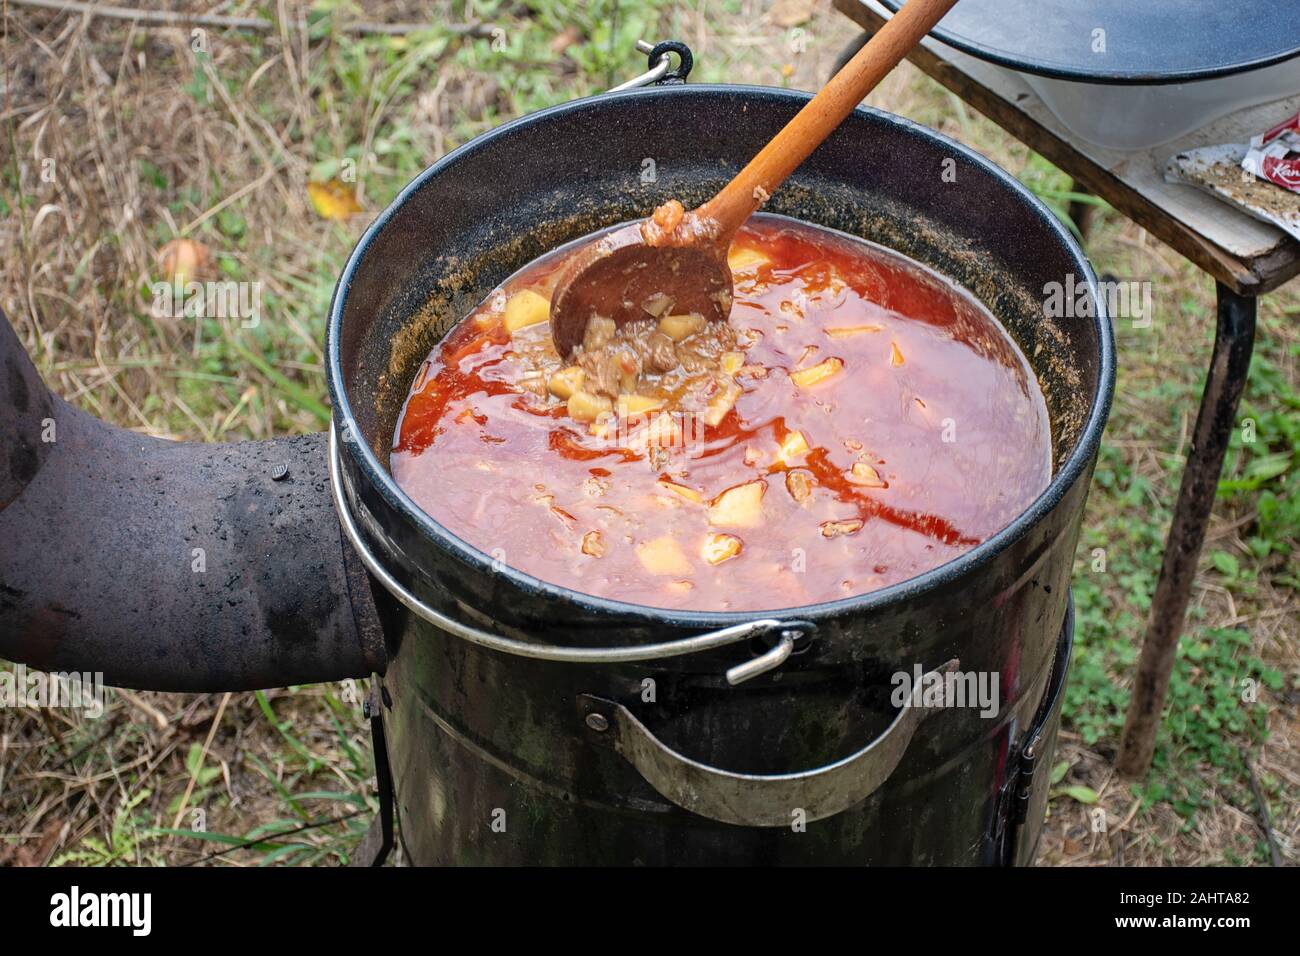 Cooking delicious kettle goulash with meet, pepper, tomatoes, onion in a large cauldron outdoors Stock Photo